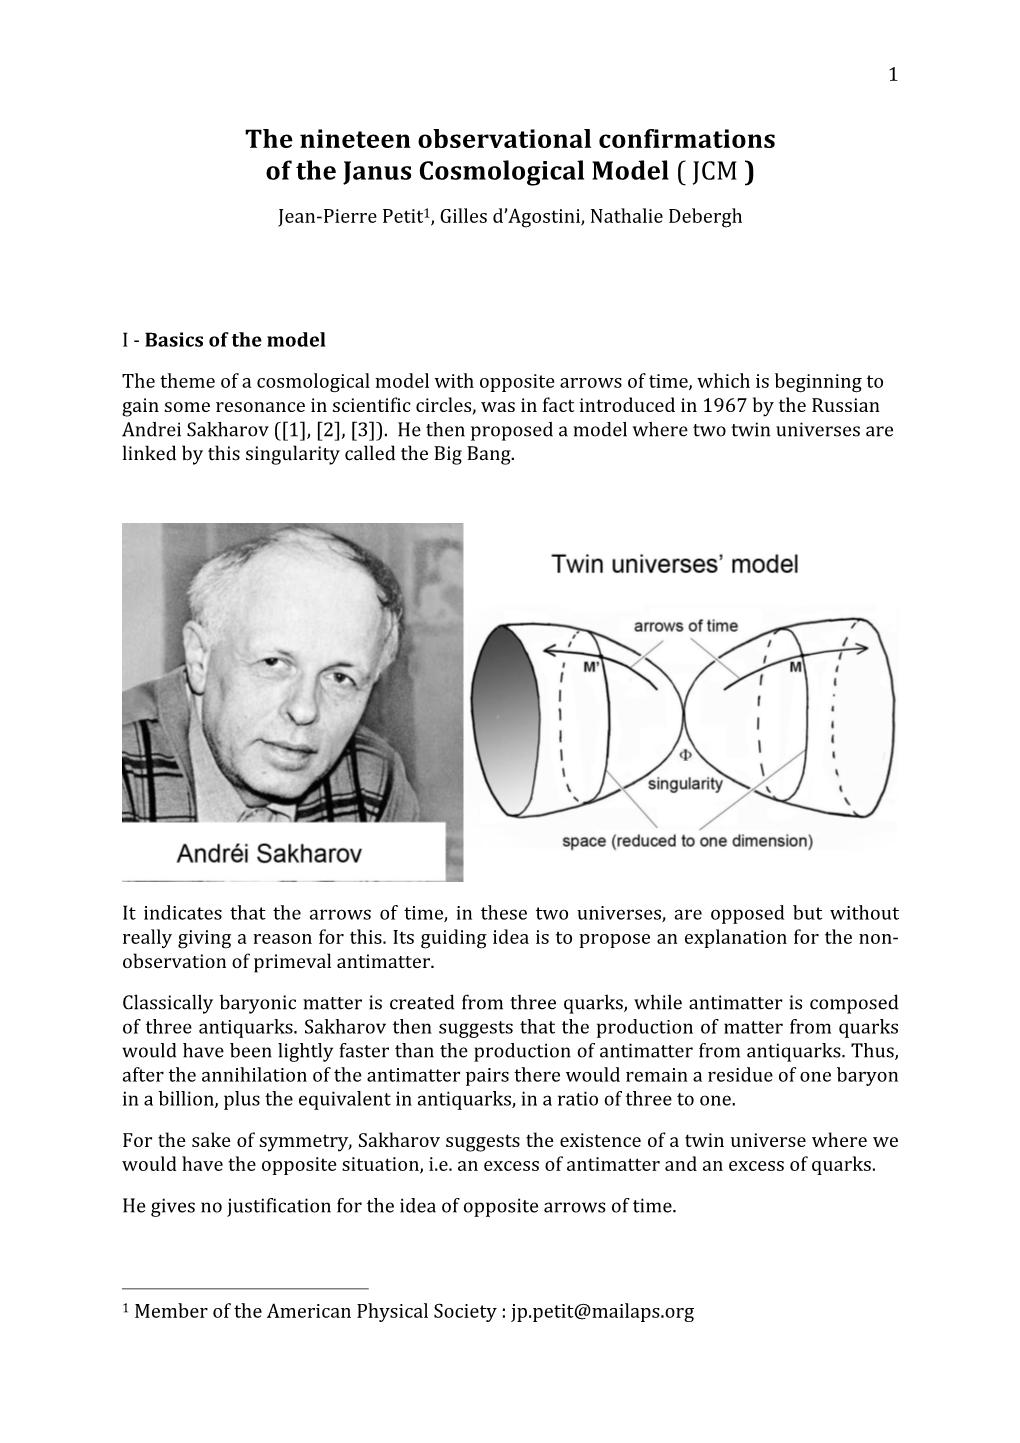 Introduction to the Janus Cosmological Model.Pdf